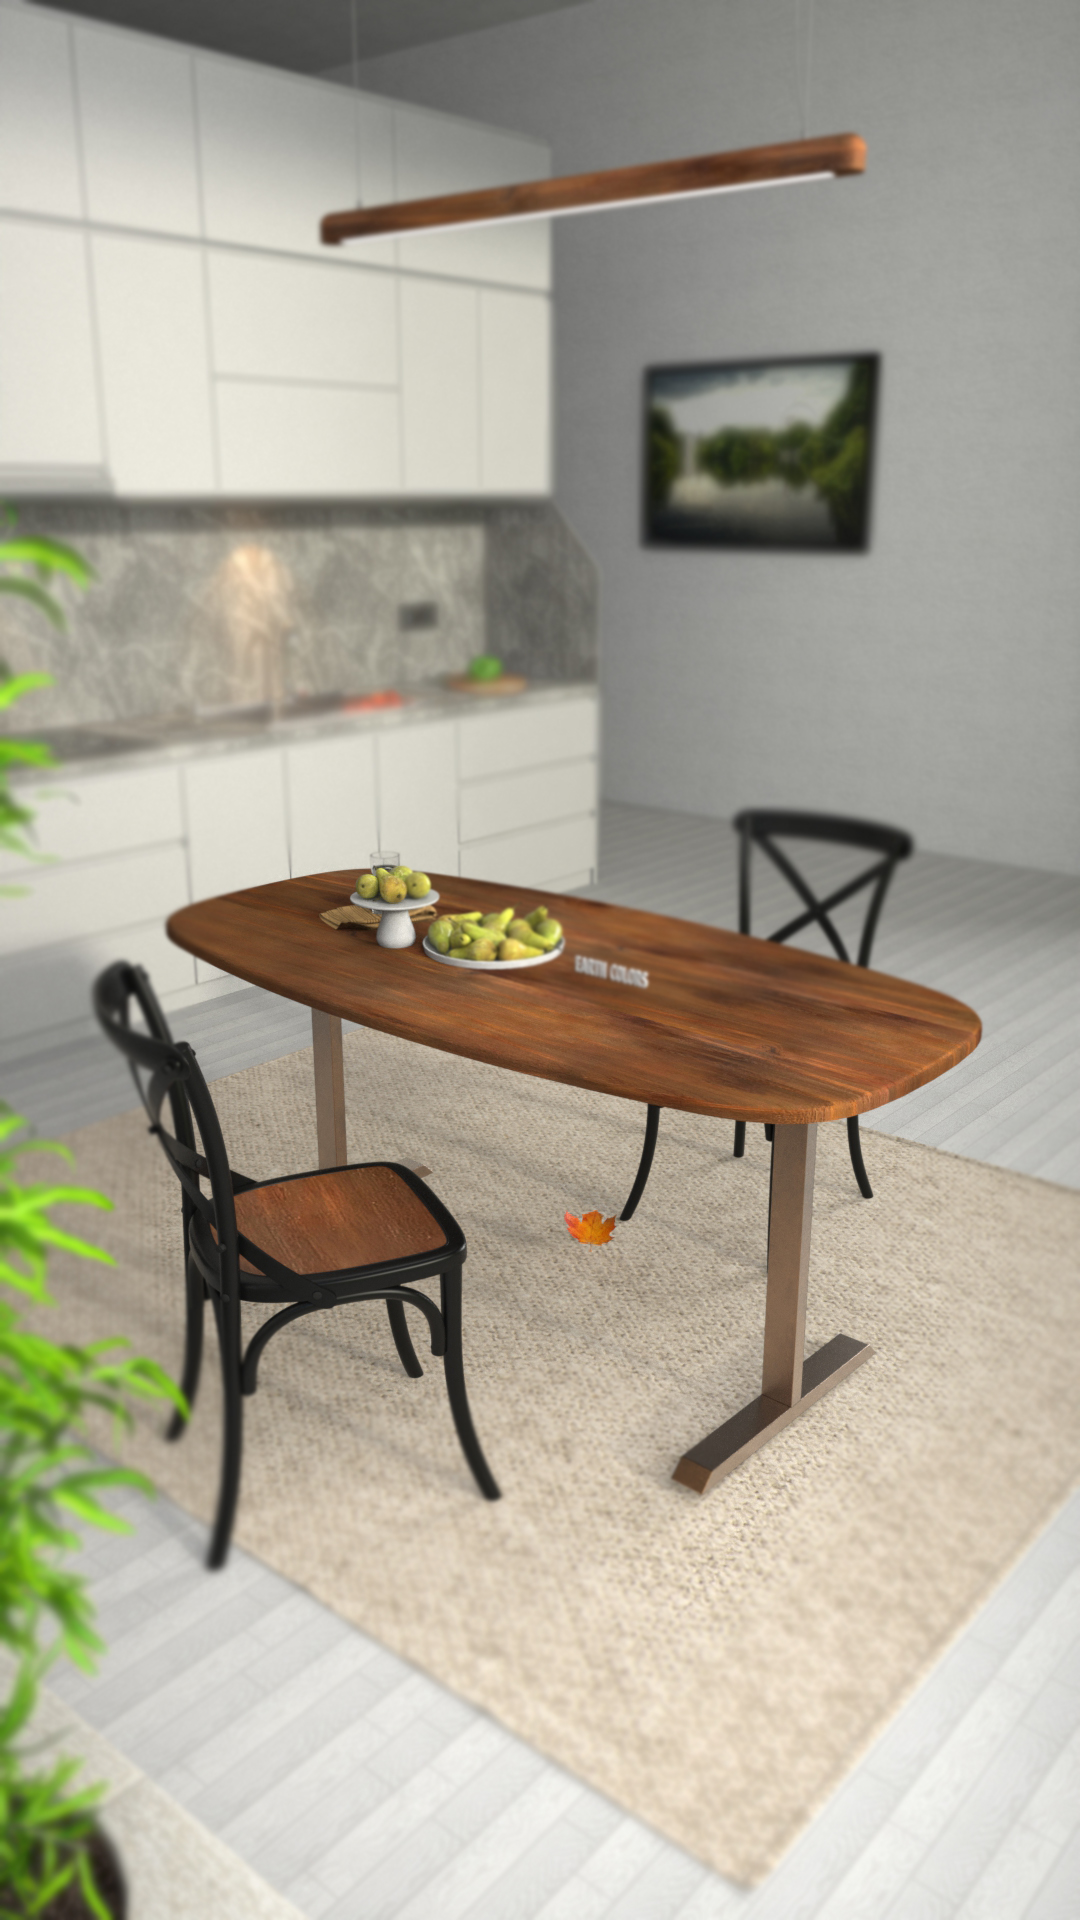 Types of wooden tables